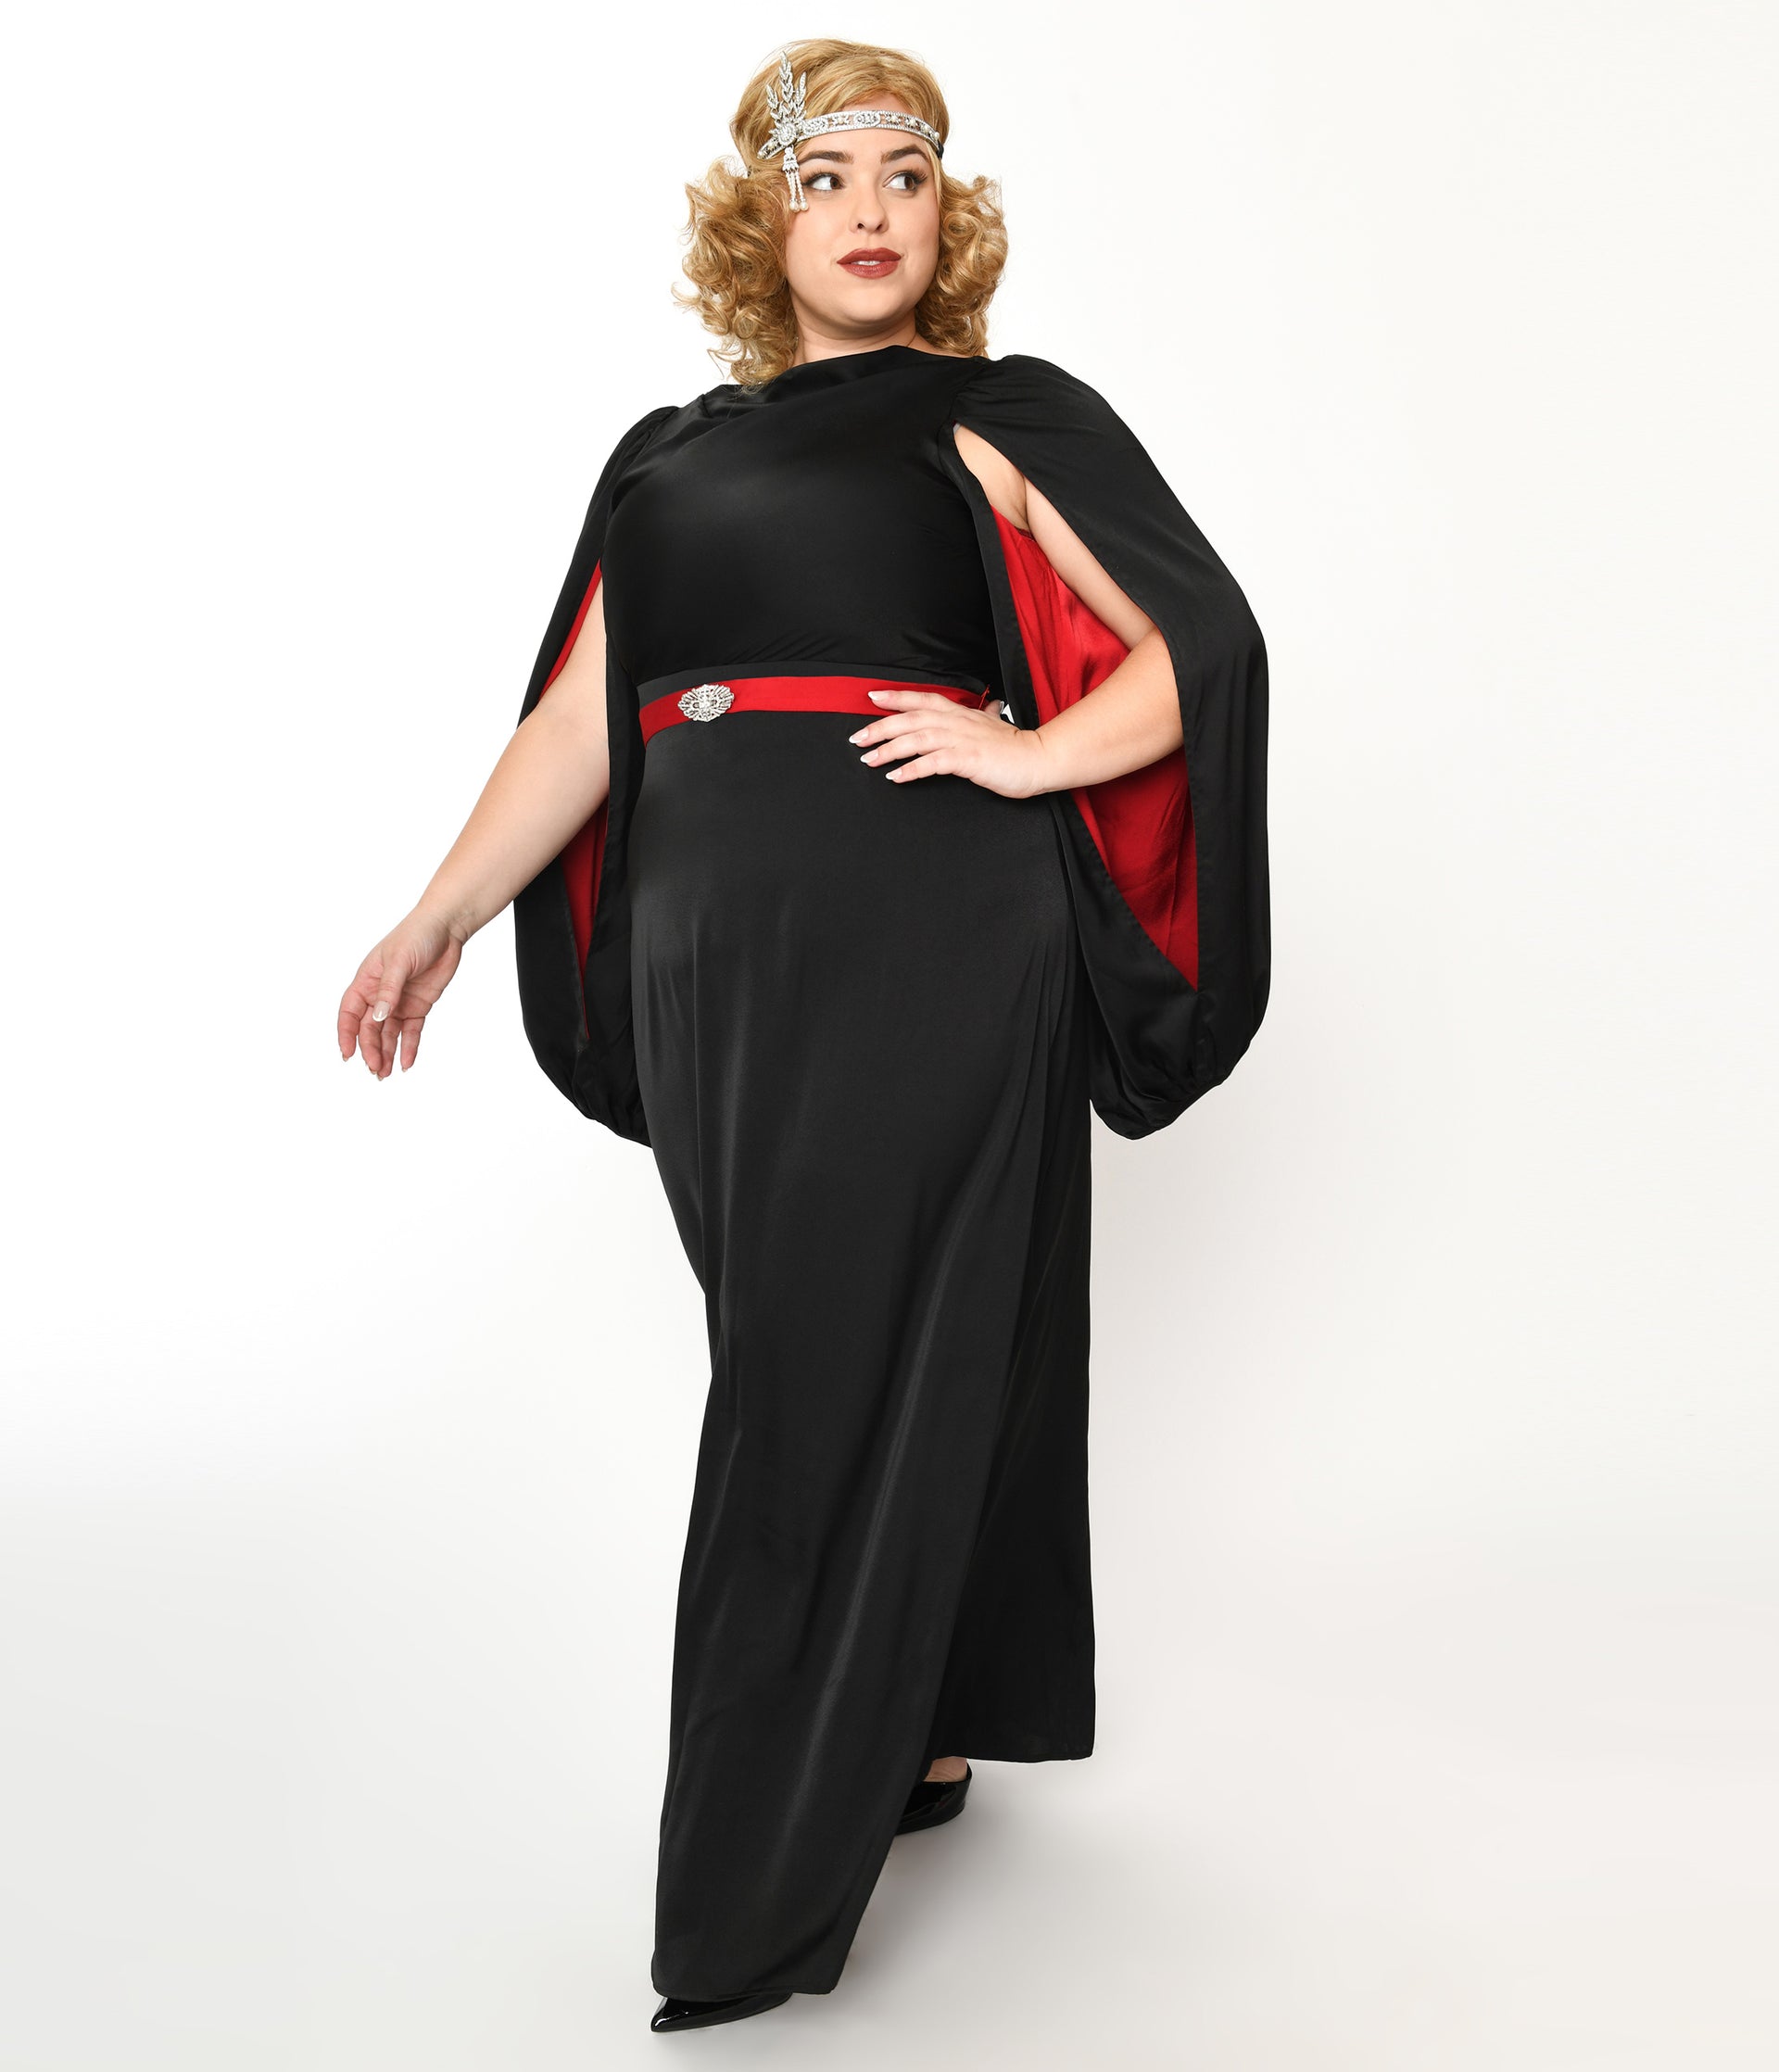 The Great Gatsby x Unique Vintage Plus Size Black Satin & Red Contrast Evening Gown